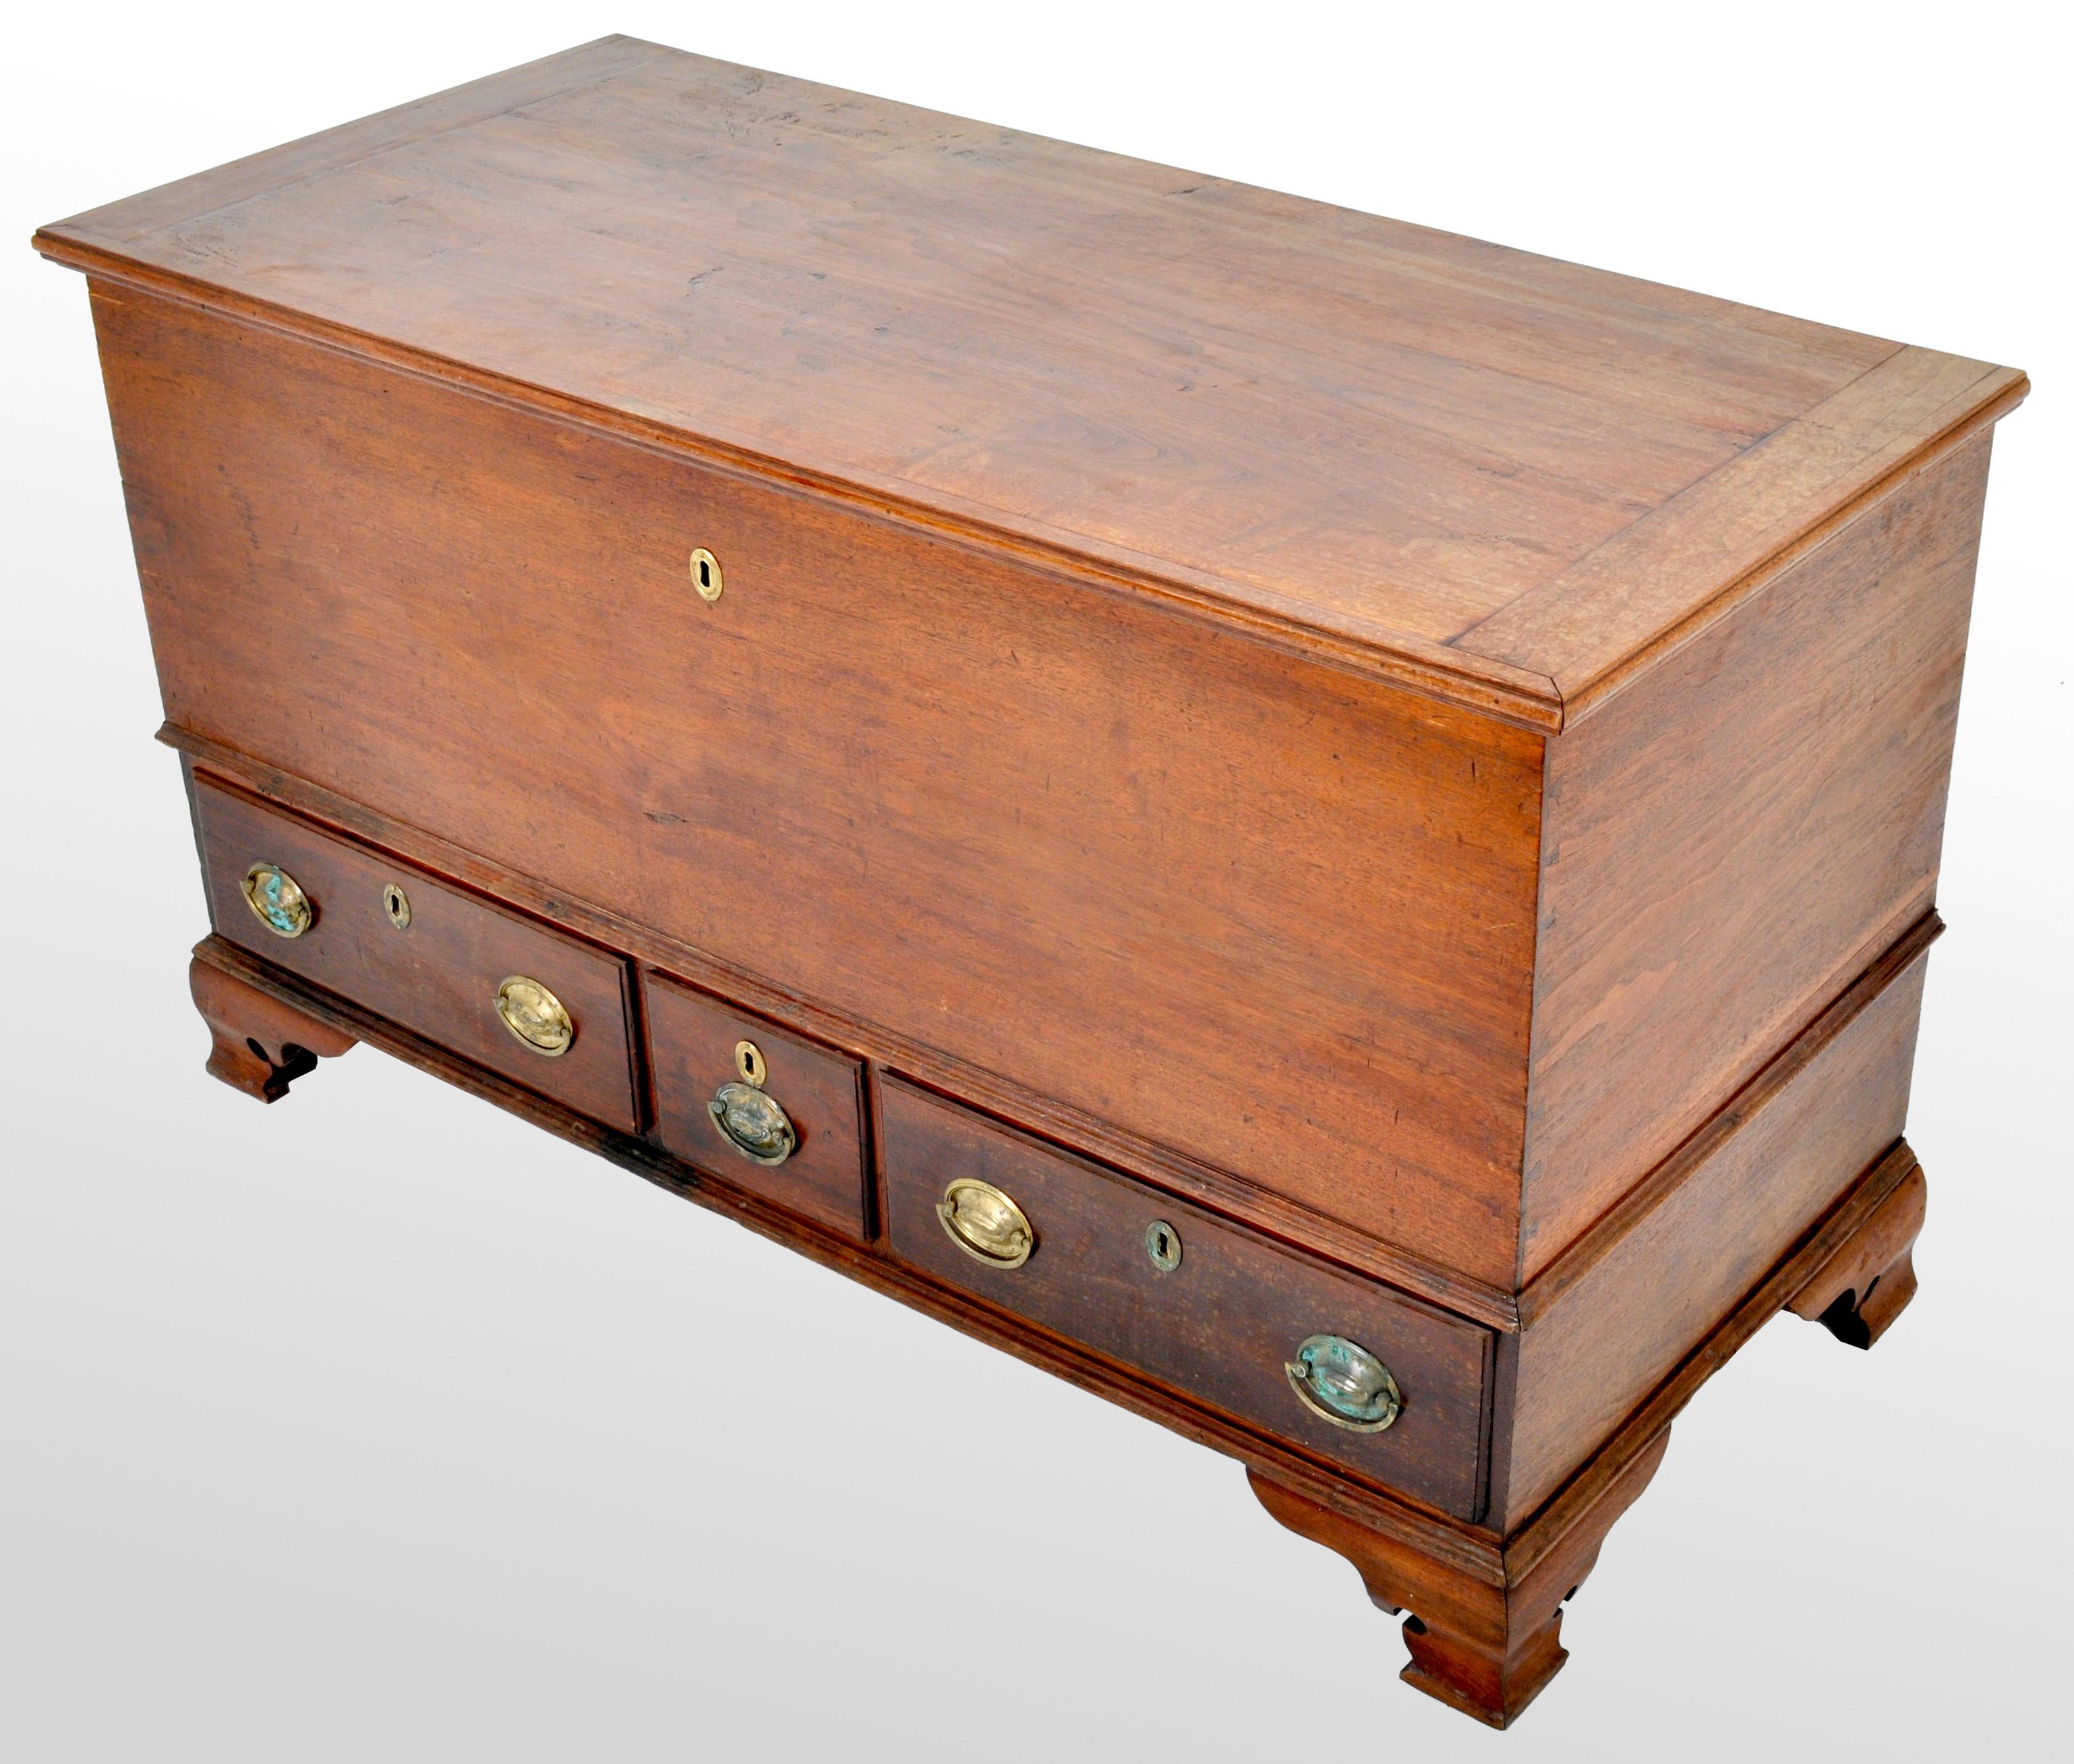 Late 18th Century Antique American Federal Period Chippendale Cherry Mule Chest, Pennsylvania 1780